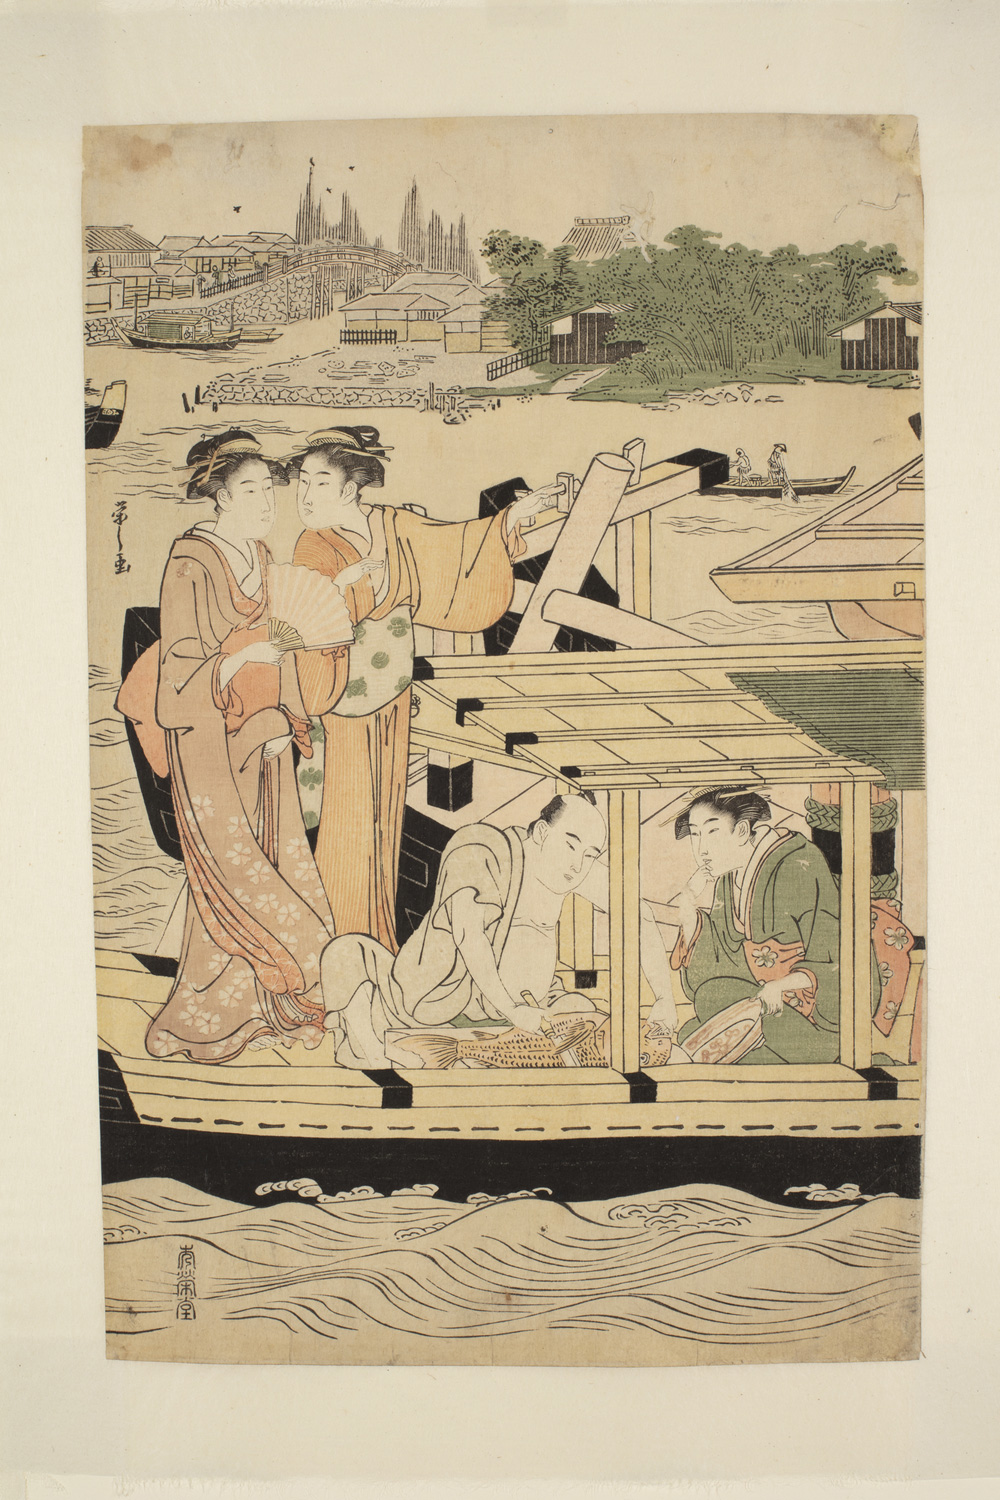 Japanese print of a river scene. Four people are on a boat on the river. Two women, in traditional clothes, are standing and two people are seated under a canopy. In the distance we see small boats and, on the far bank, a town.